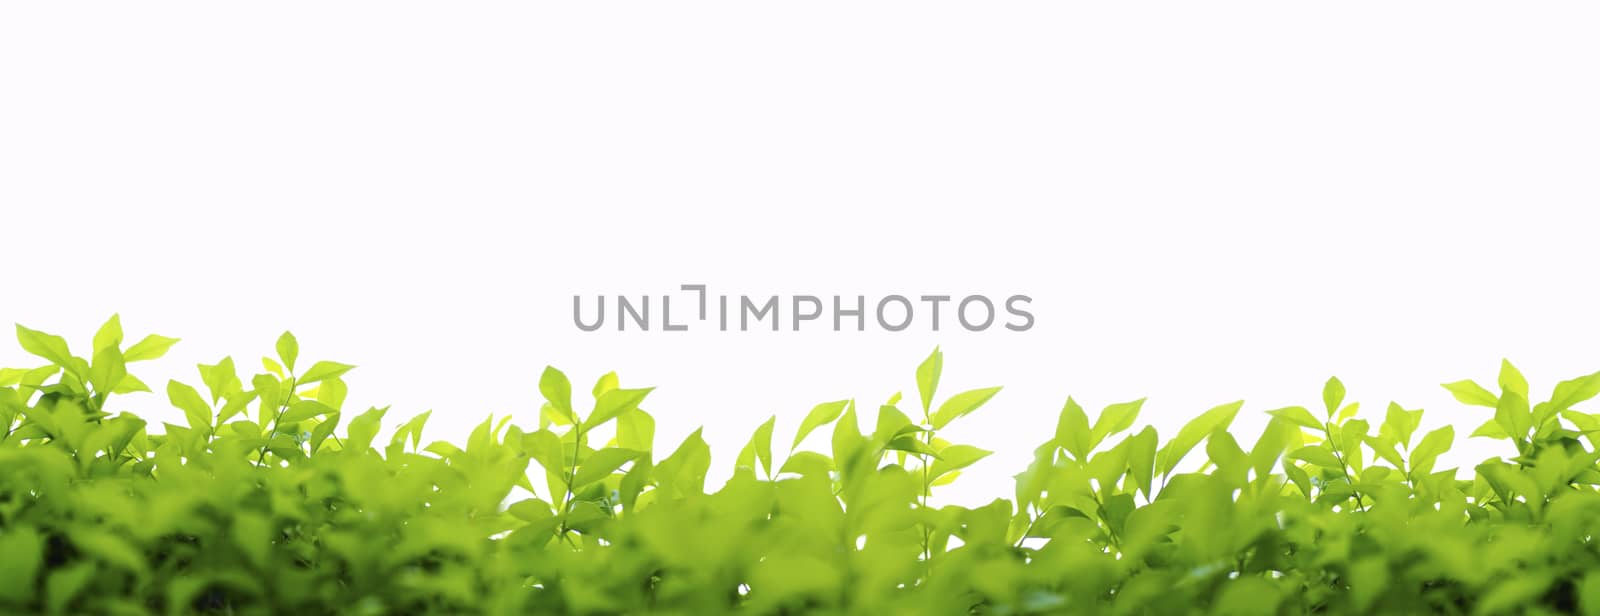 green leaves frame isolated on white background in Panorama style